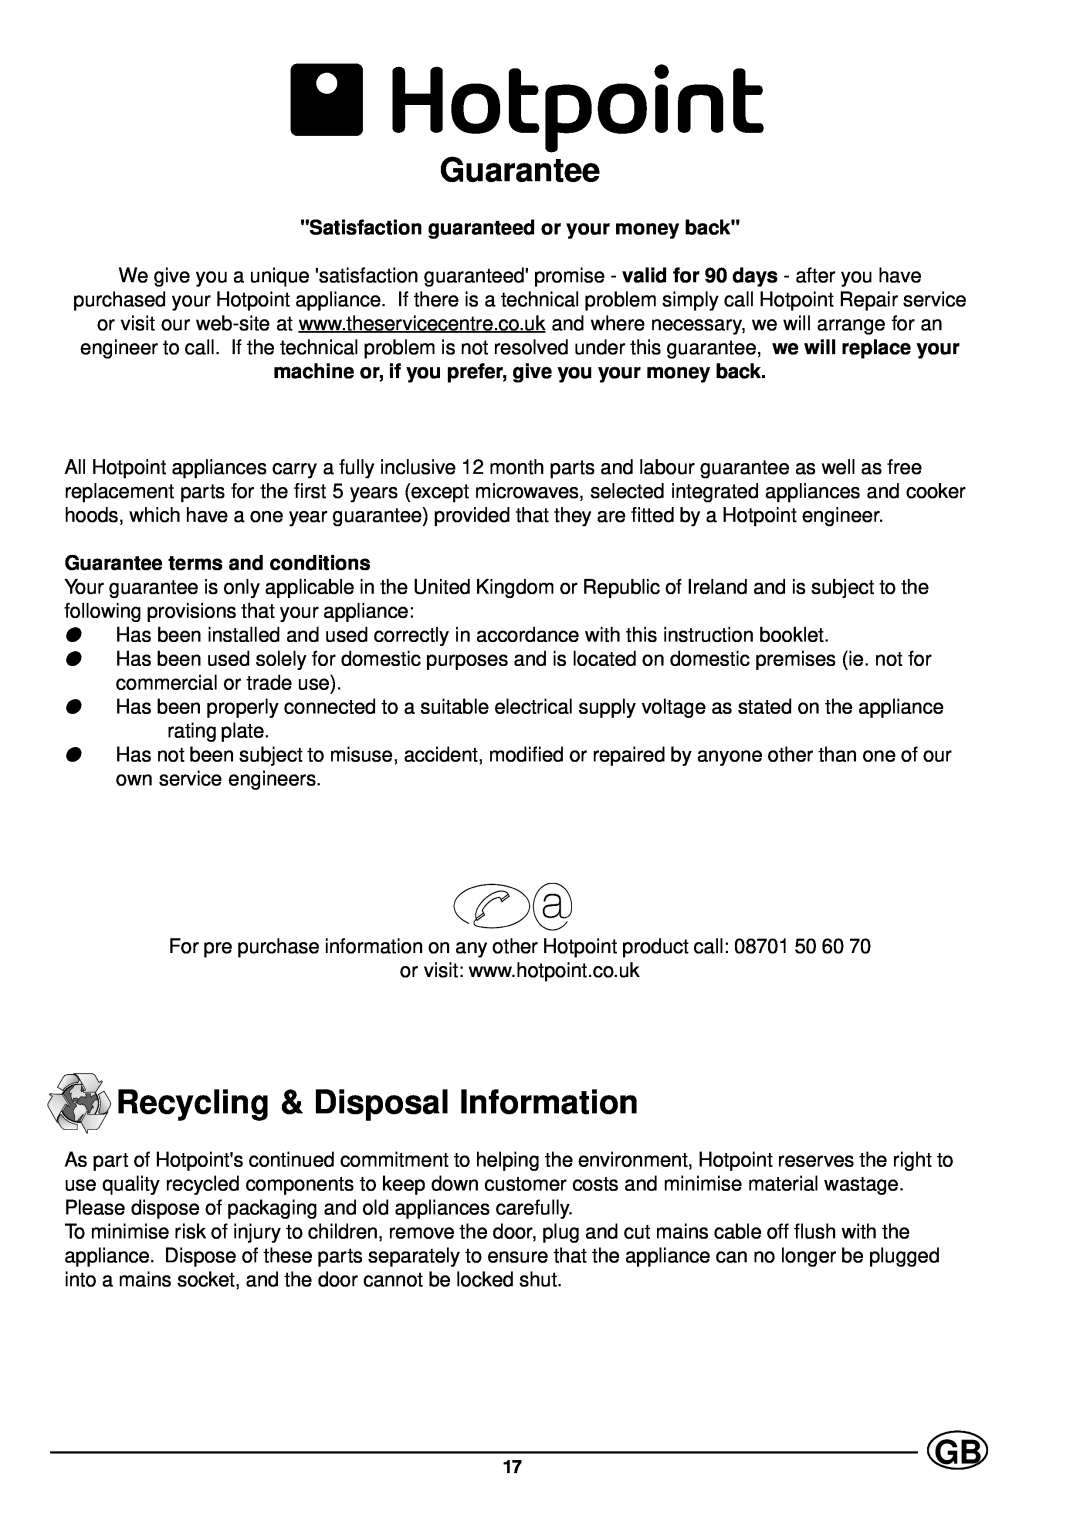 Hotpoint SC77E manual Guarantee, Recycling & Disposal Information, Satisfaction guaranteed or your money back 